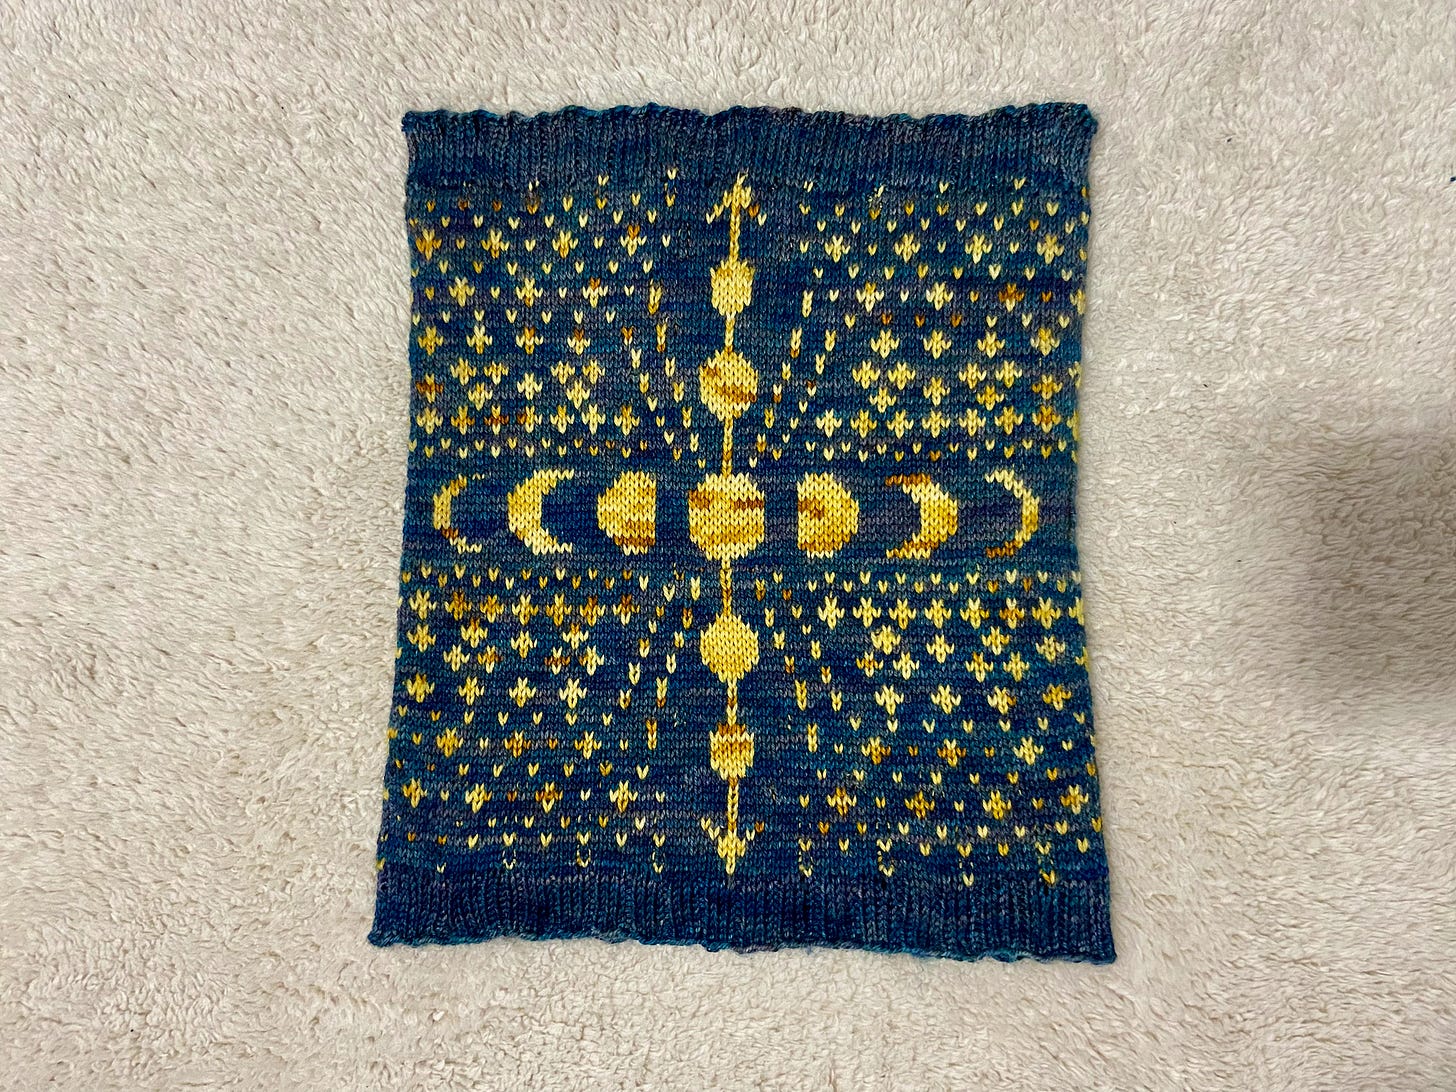 The Ixchel Cowl, which has a variegated blue background and variegated yellow stars, moons, and an arrow, laying on an off-white blanket.